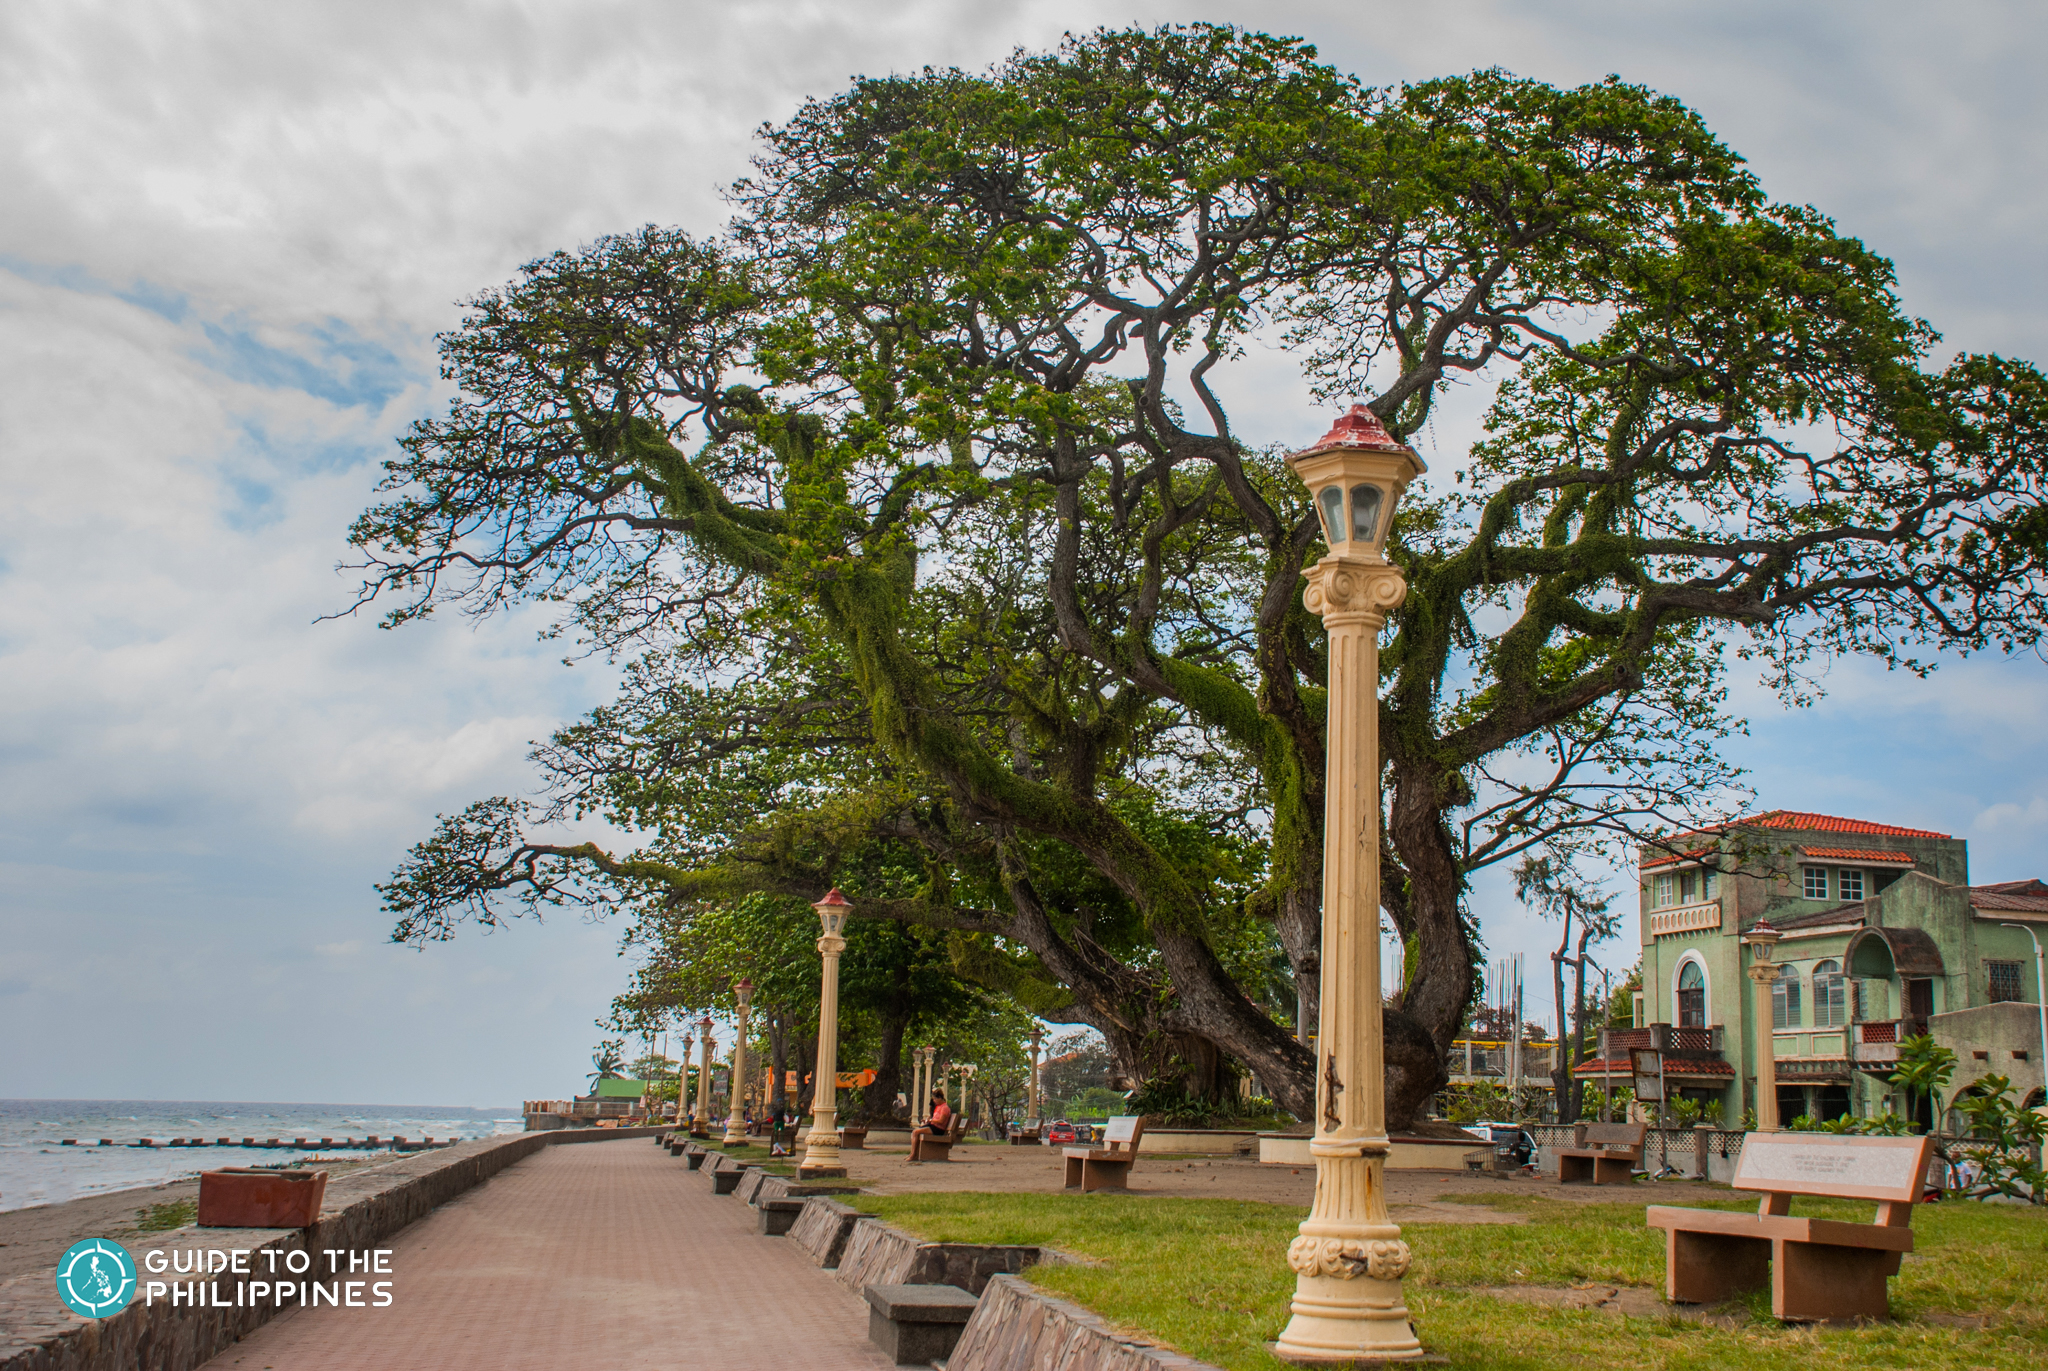 Lamposts along Rizal Boulevard in Dumaguete City